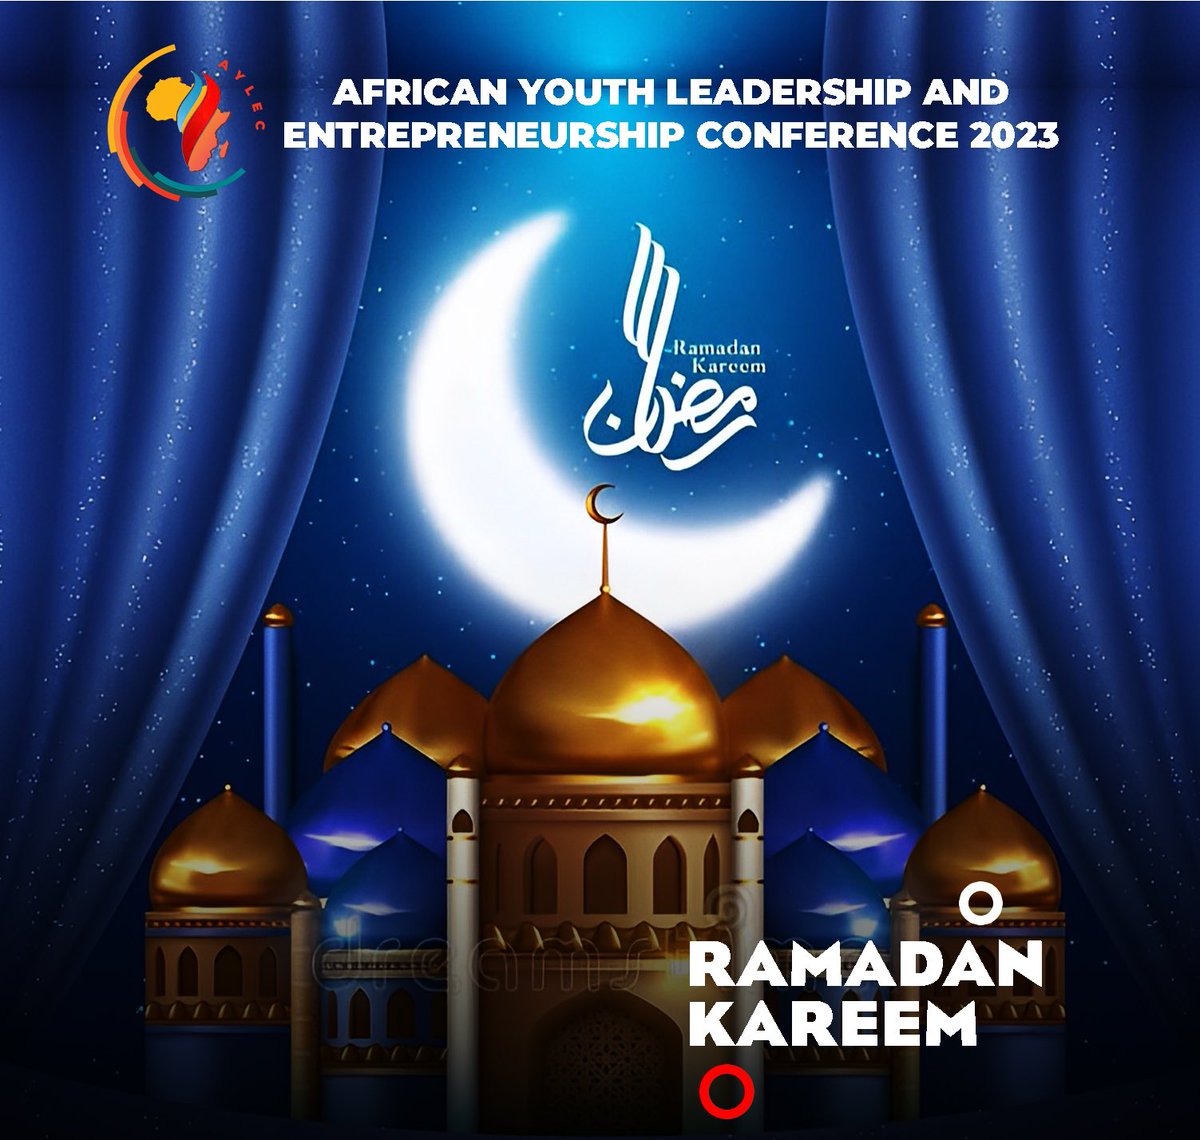 May this Ramadan be a time of reflection, forgiveness, and spiritual growth. Wishing you a peaceful and blessed month ahead. 

Ramadan Kareem 🌙 

#AYLEC23
#VisitKenya
#AfricanLeadership